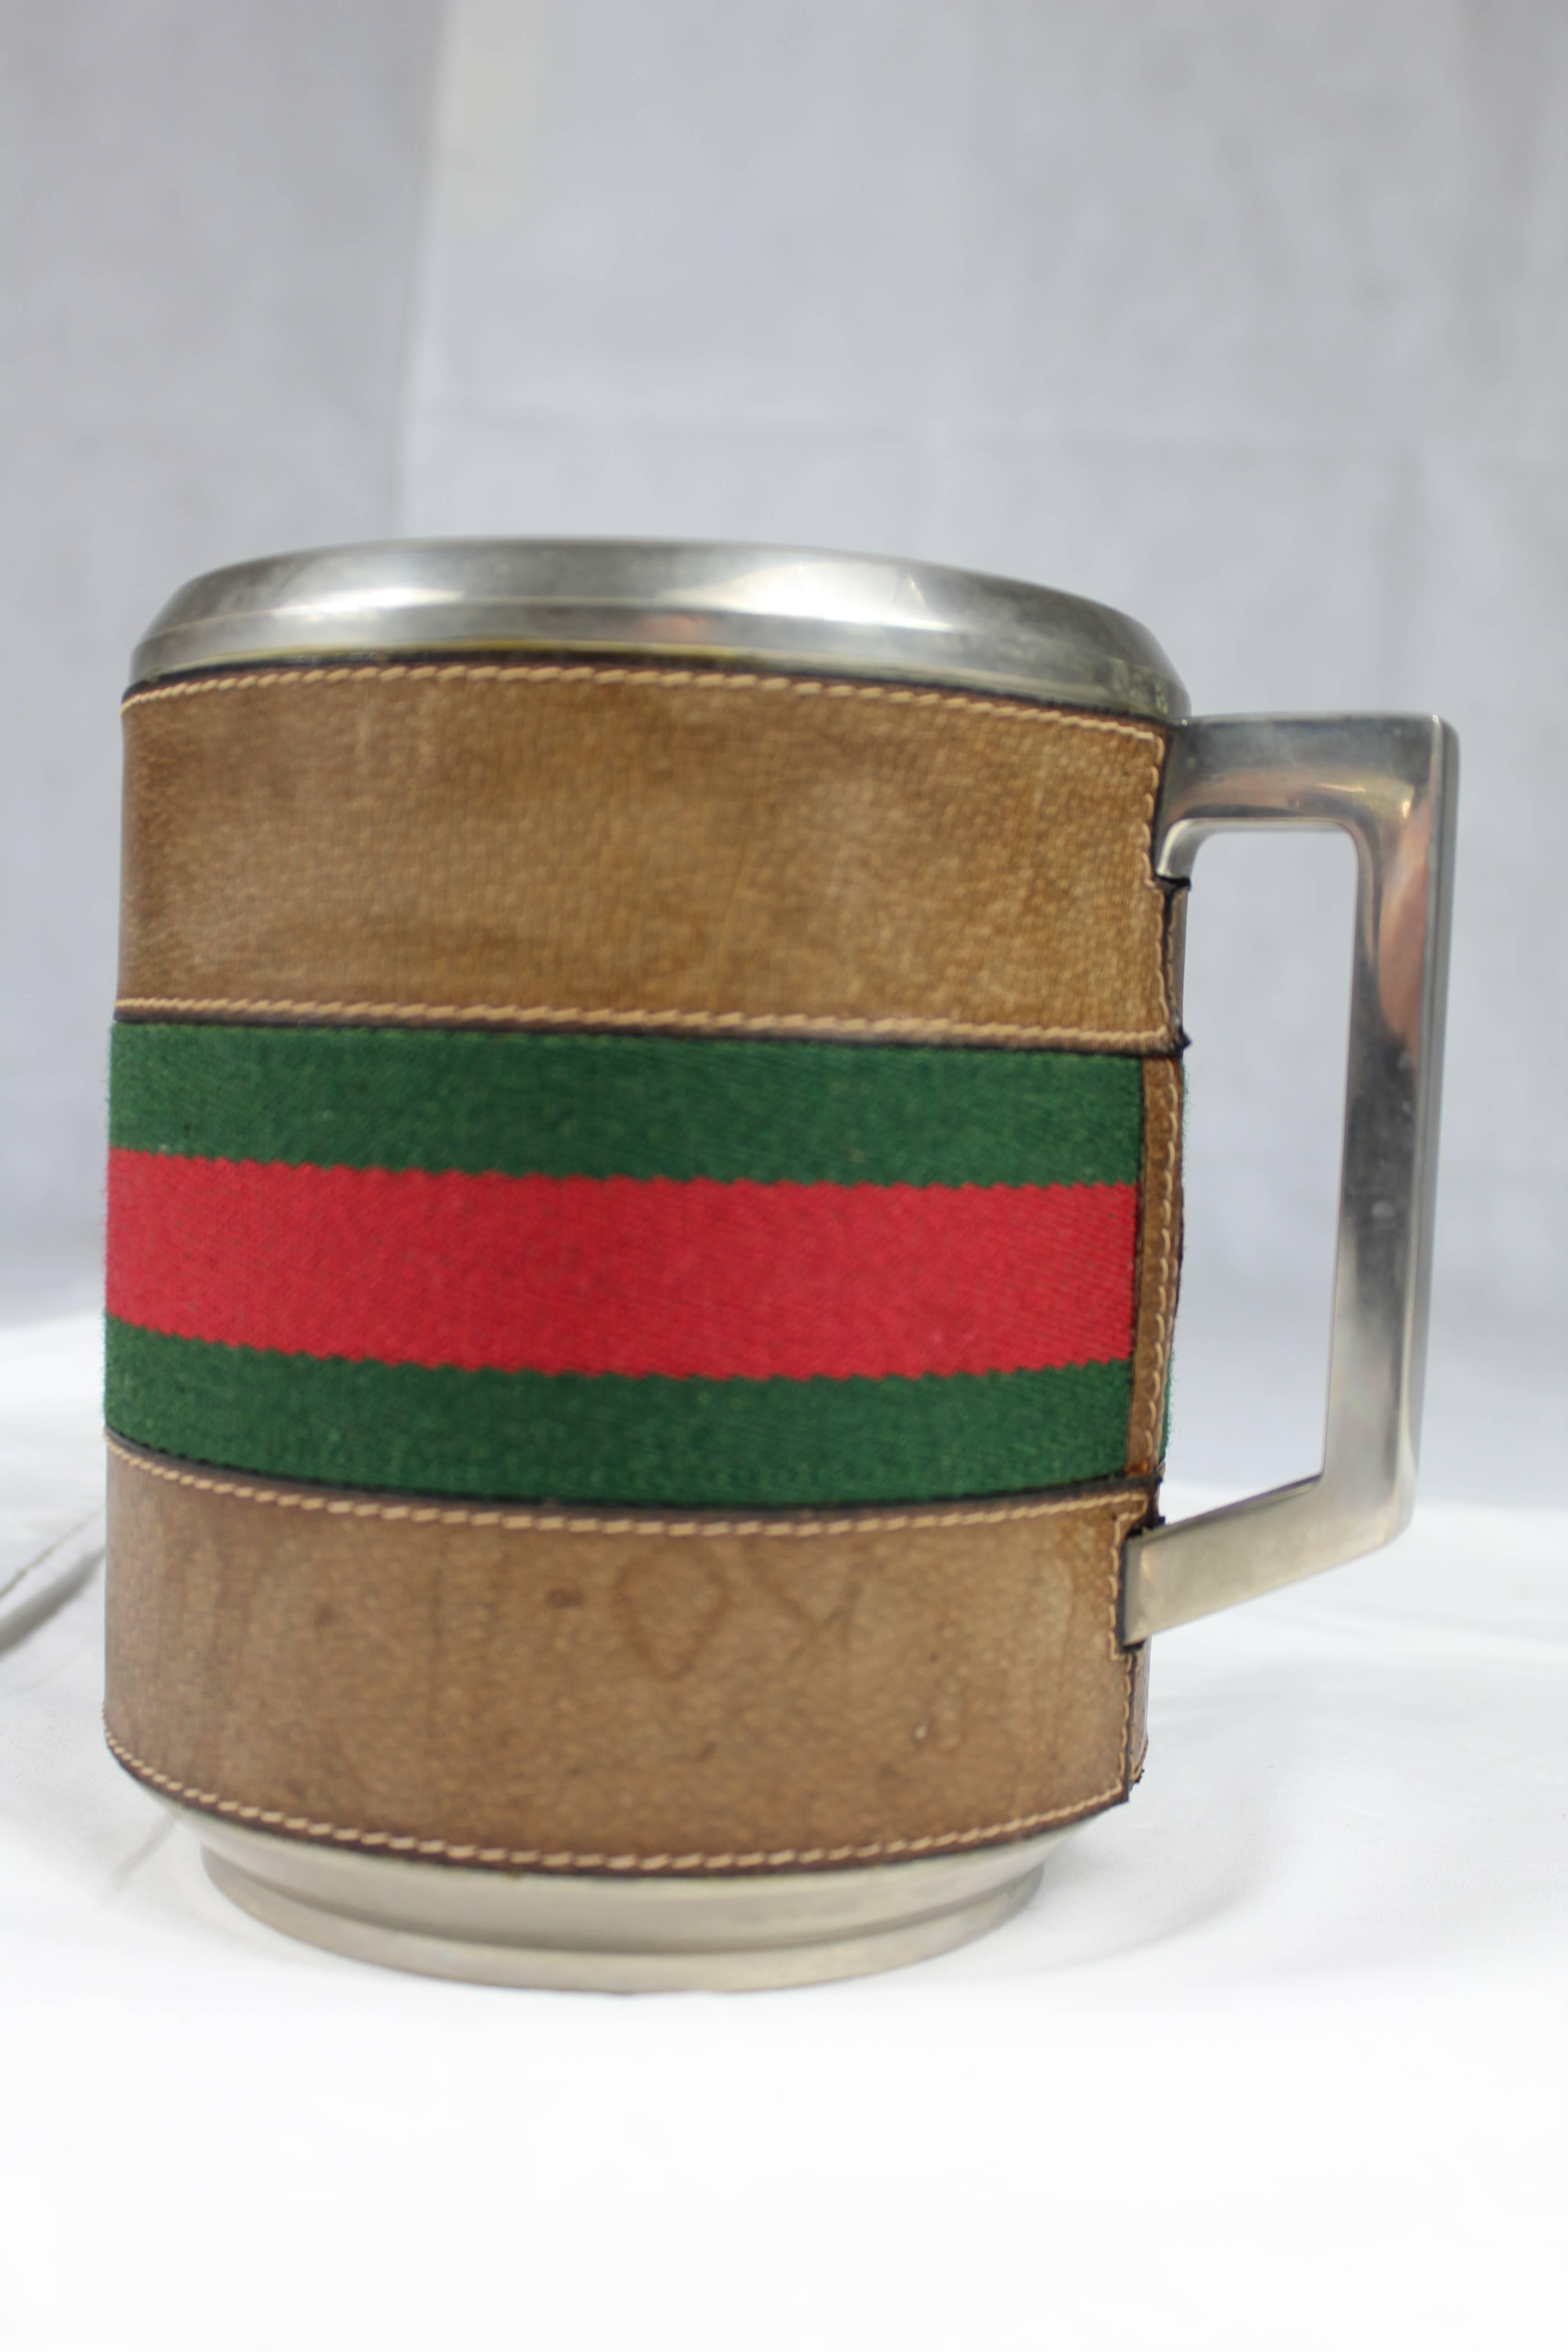 Ice bucket from Gucci circa 1970s, original leather and the typical Gucci stripe in green and red. Excellent conditions.